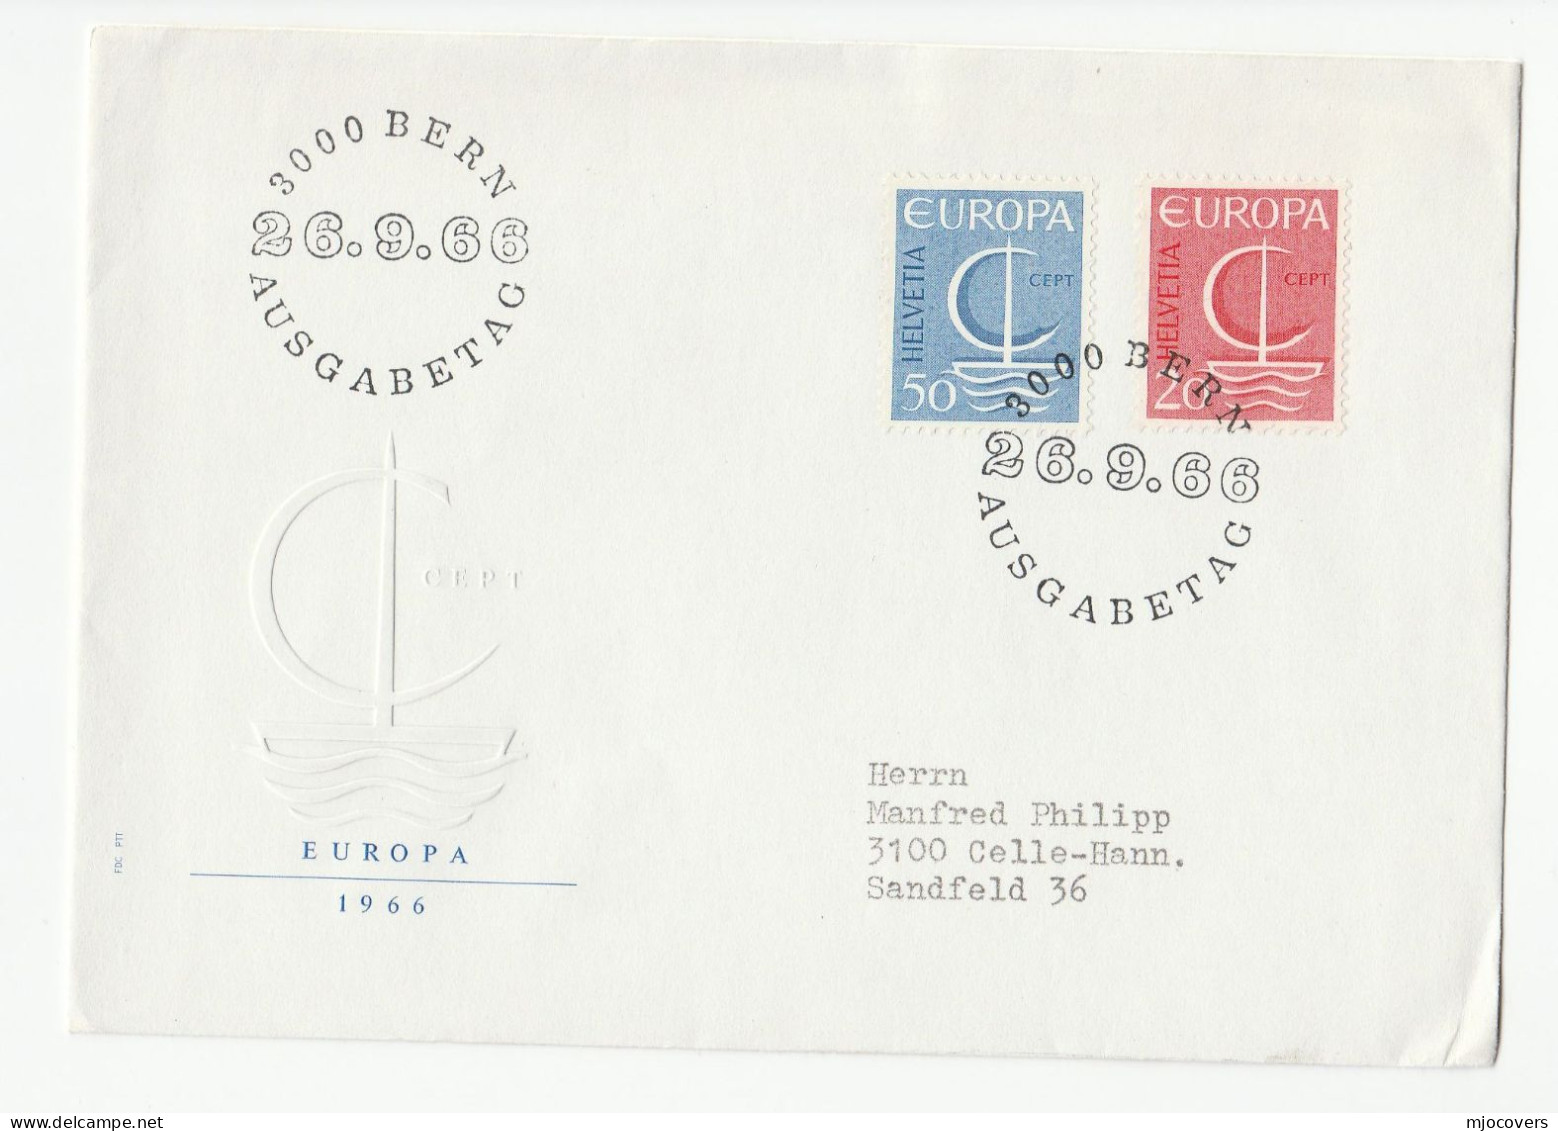 EUROPA 10 diff SWITZERLAND FDCs 1959 - 1977 fdc cover stamps